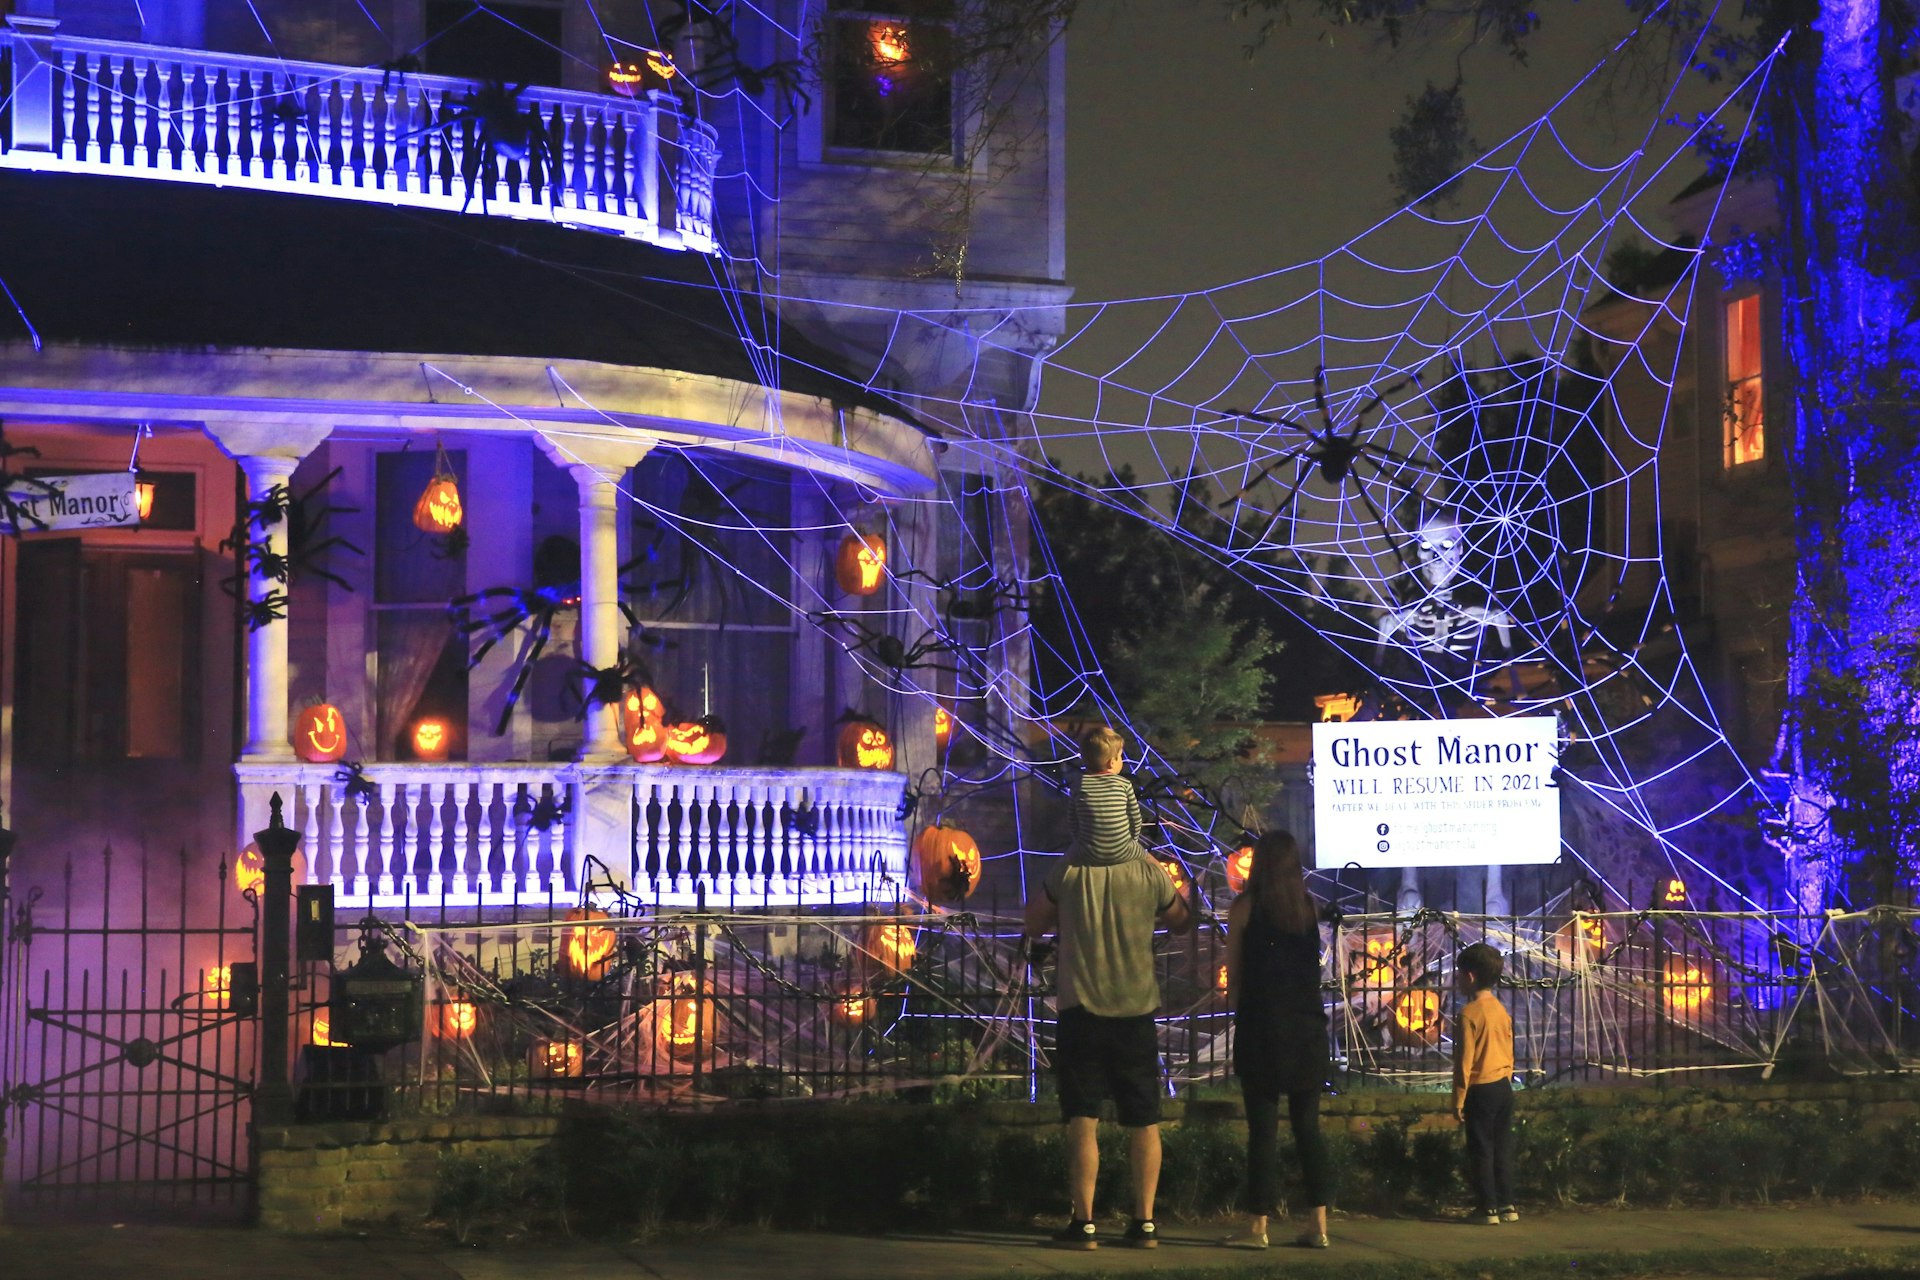 Halloween decorations in New Orleans